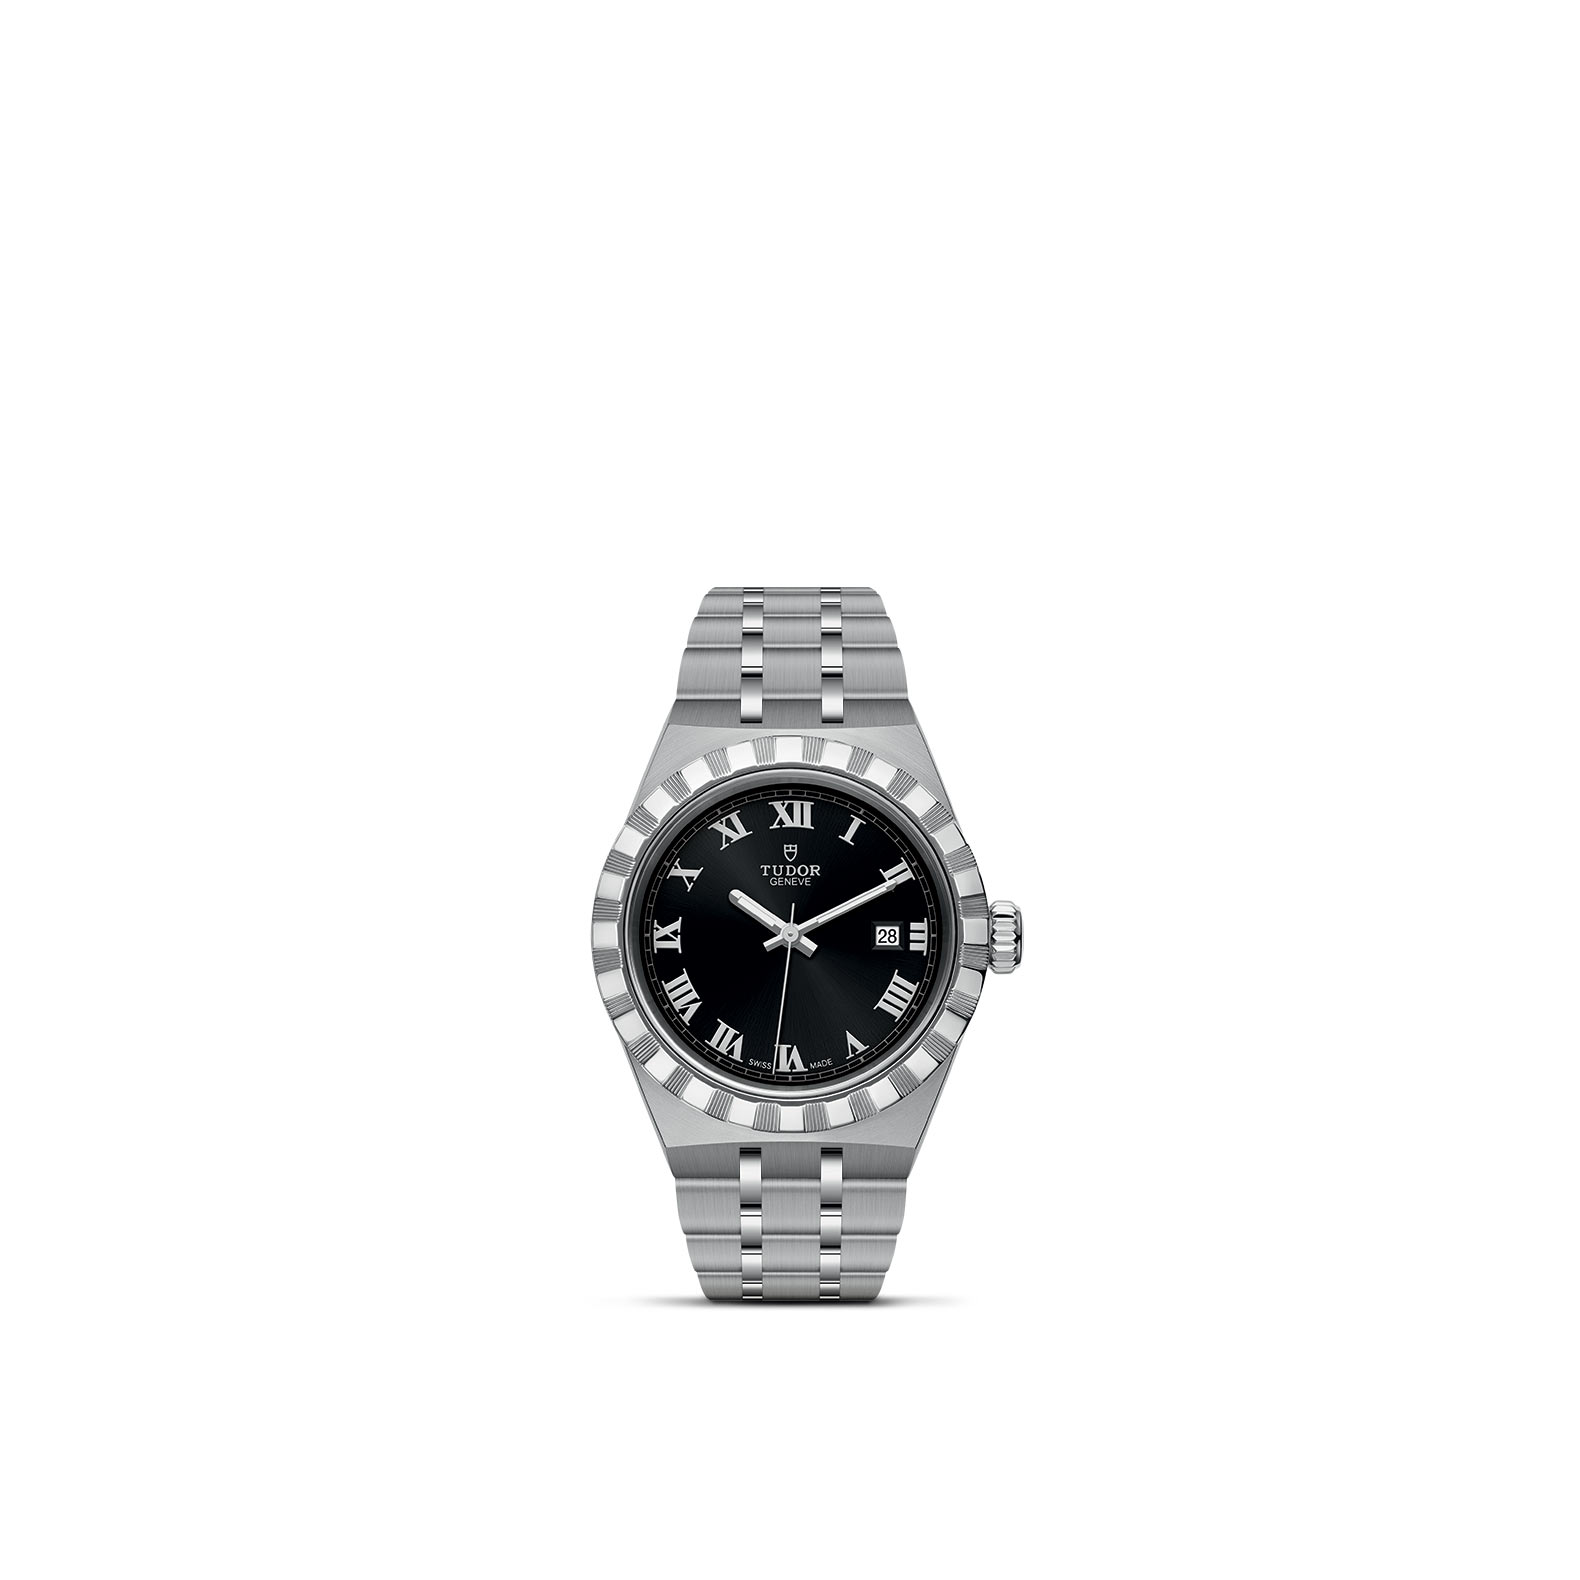 TUDOR TUDOR ROYAL standing upright, highlighting its classic design against a white background.